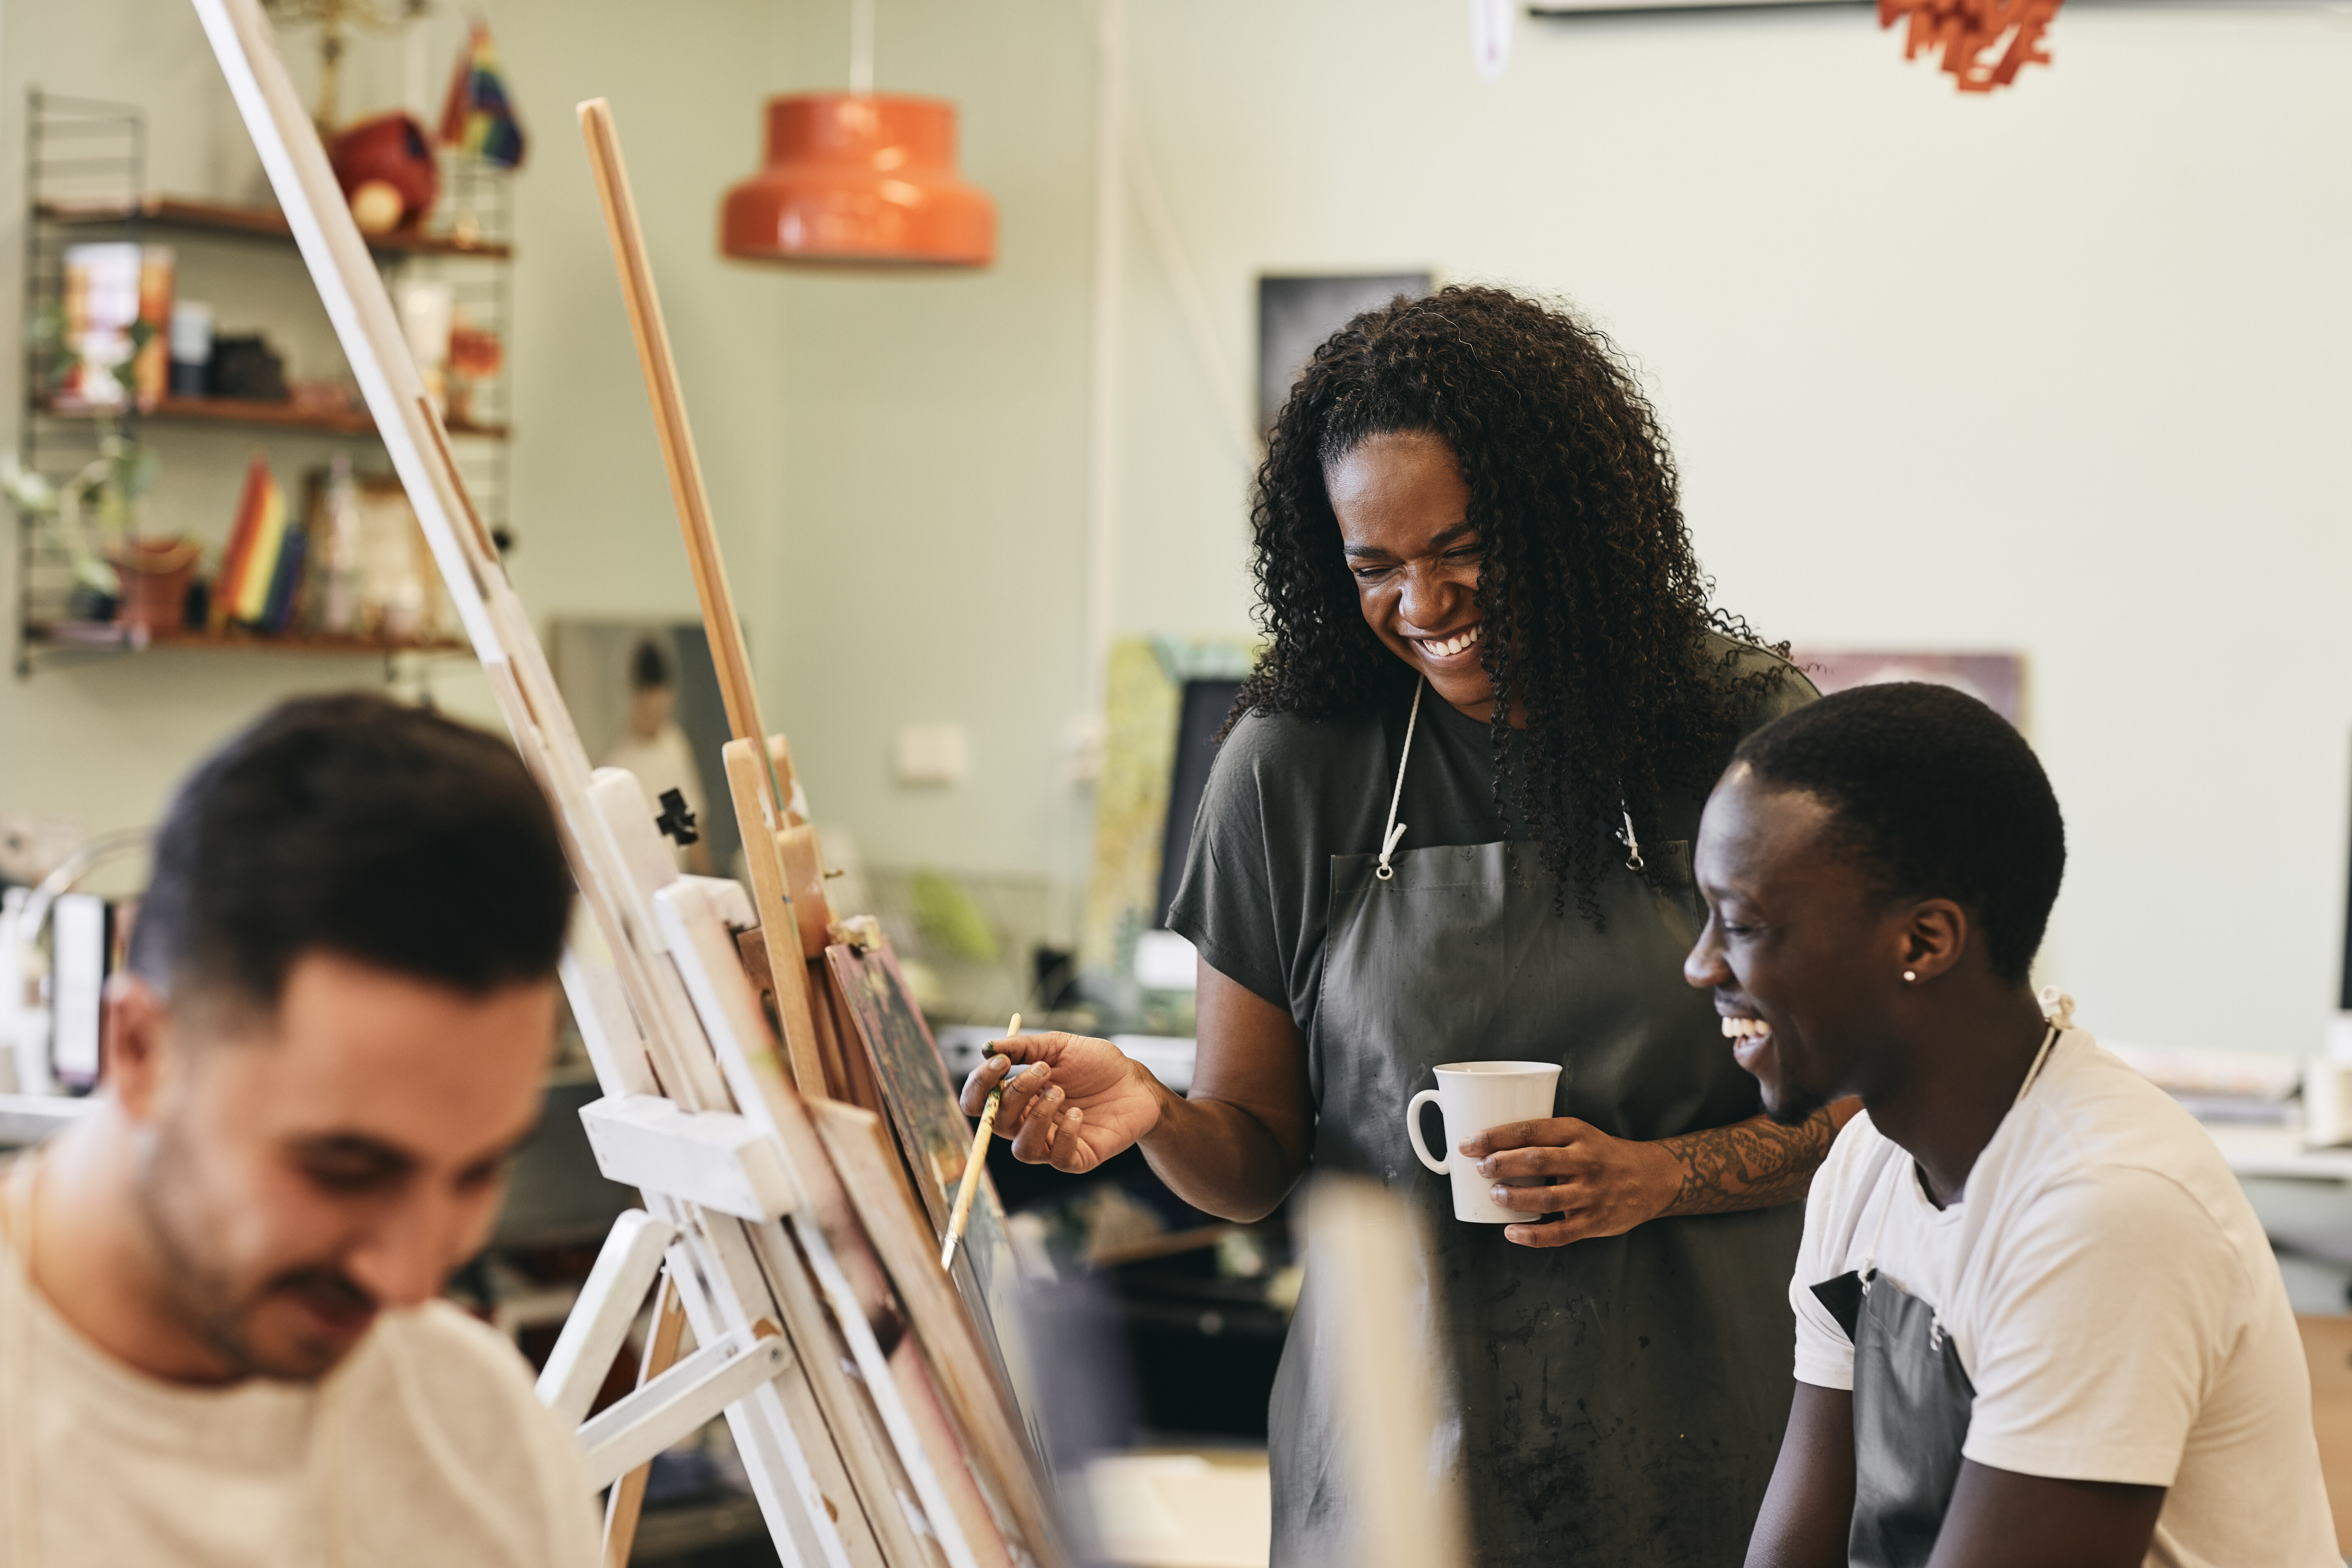 A middle-aged Black woman painting in a class alongside a young man, laughing